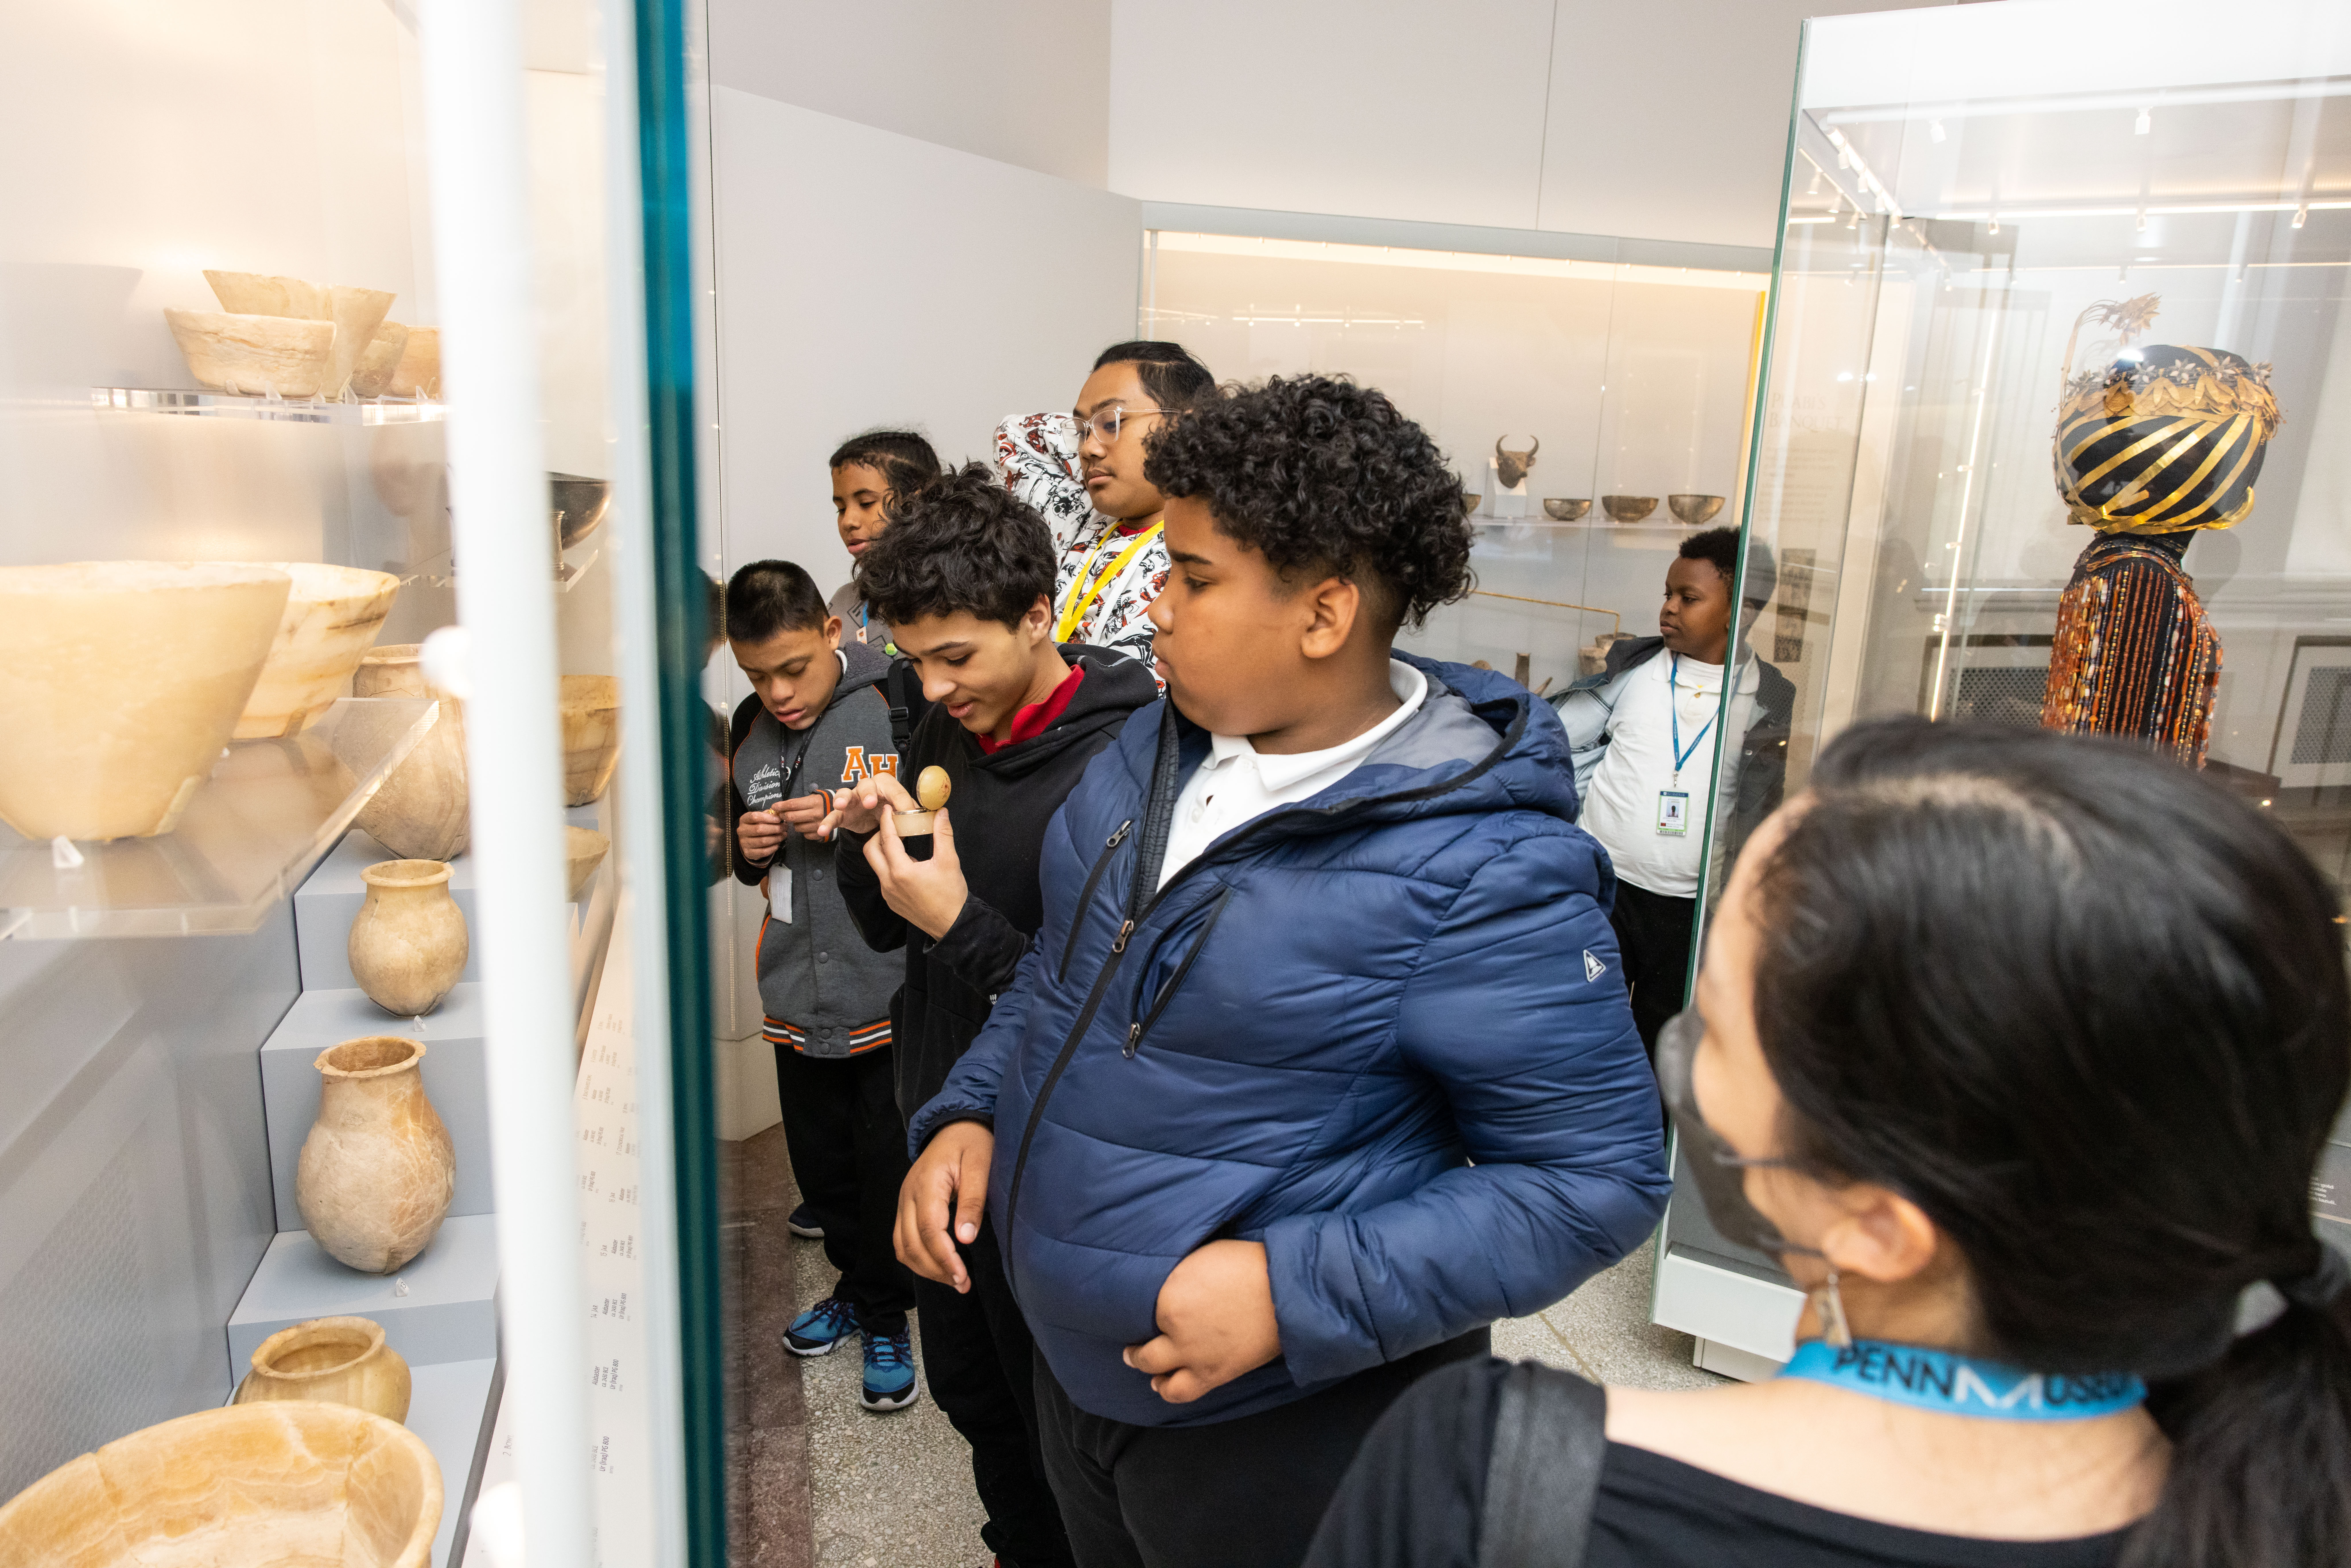 A group of young viewers looking at an exhibit at the Penn Museum.